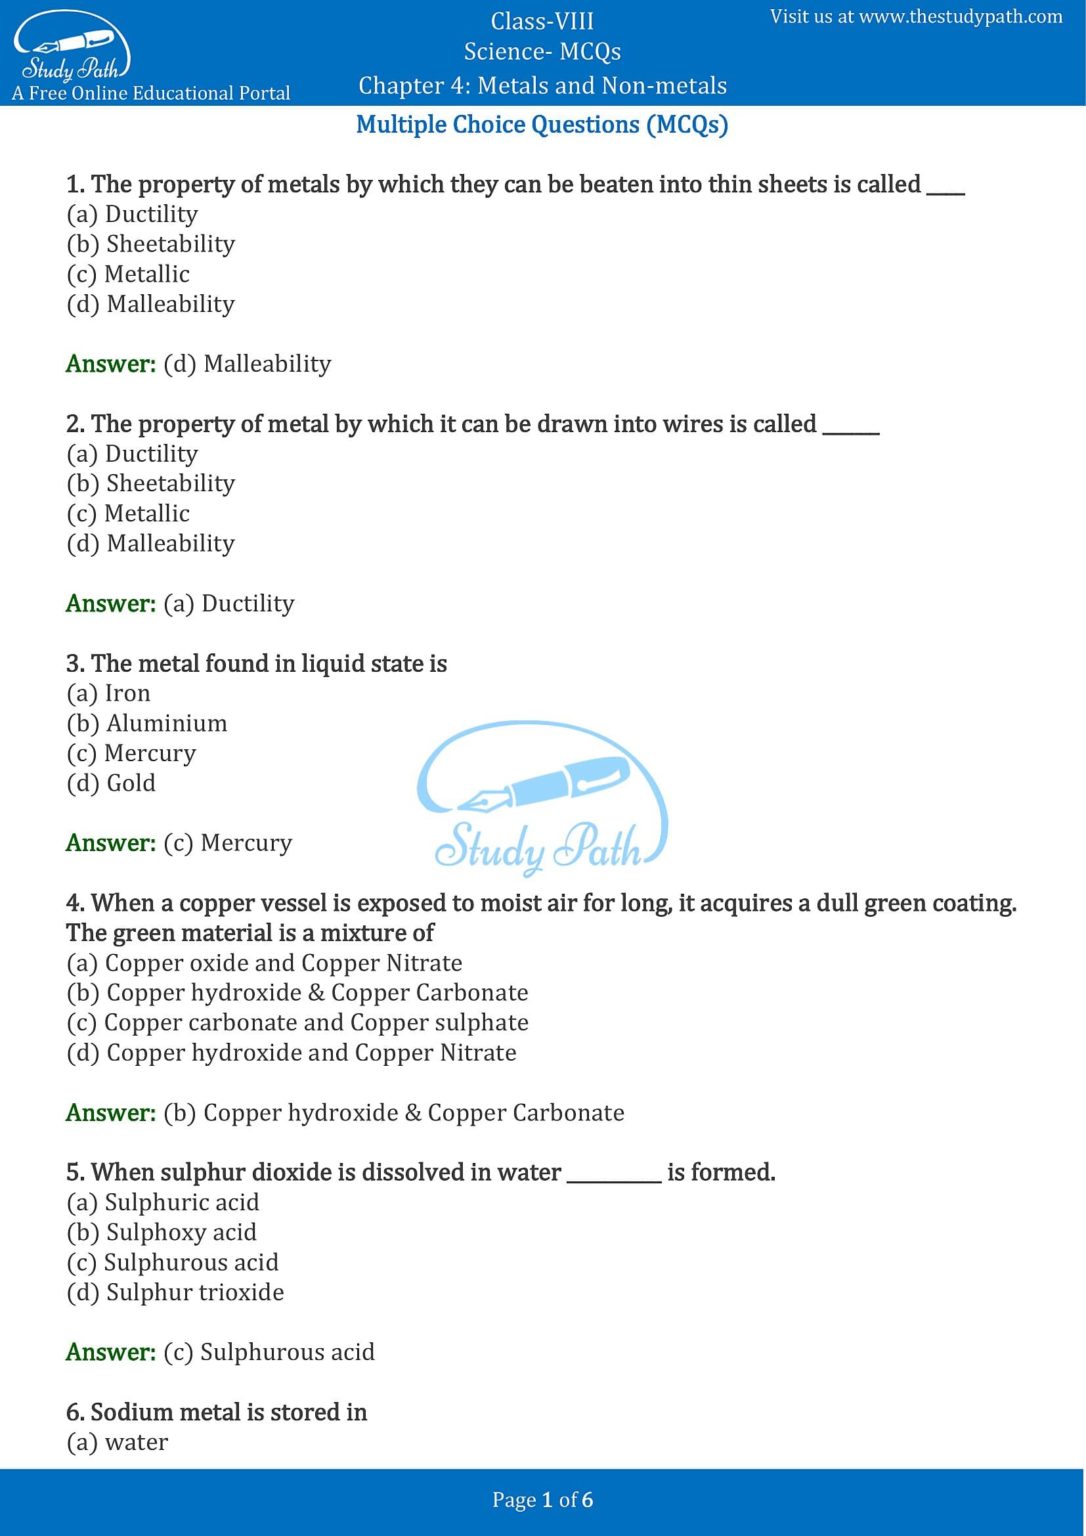 case study questions class 8 science chapter 4